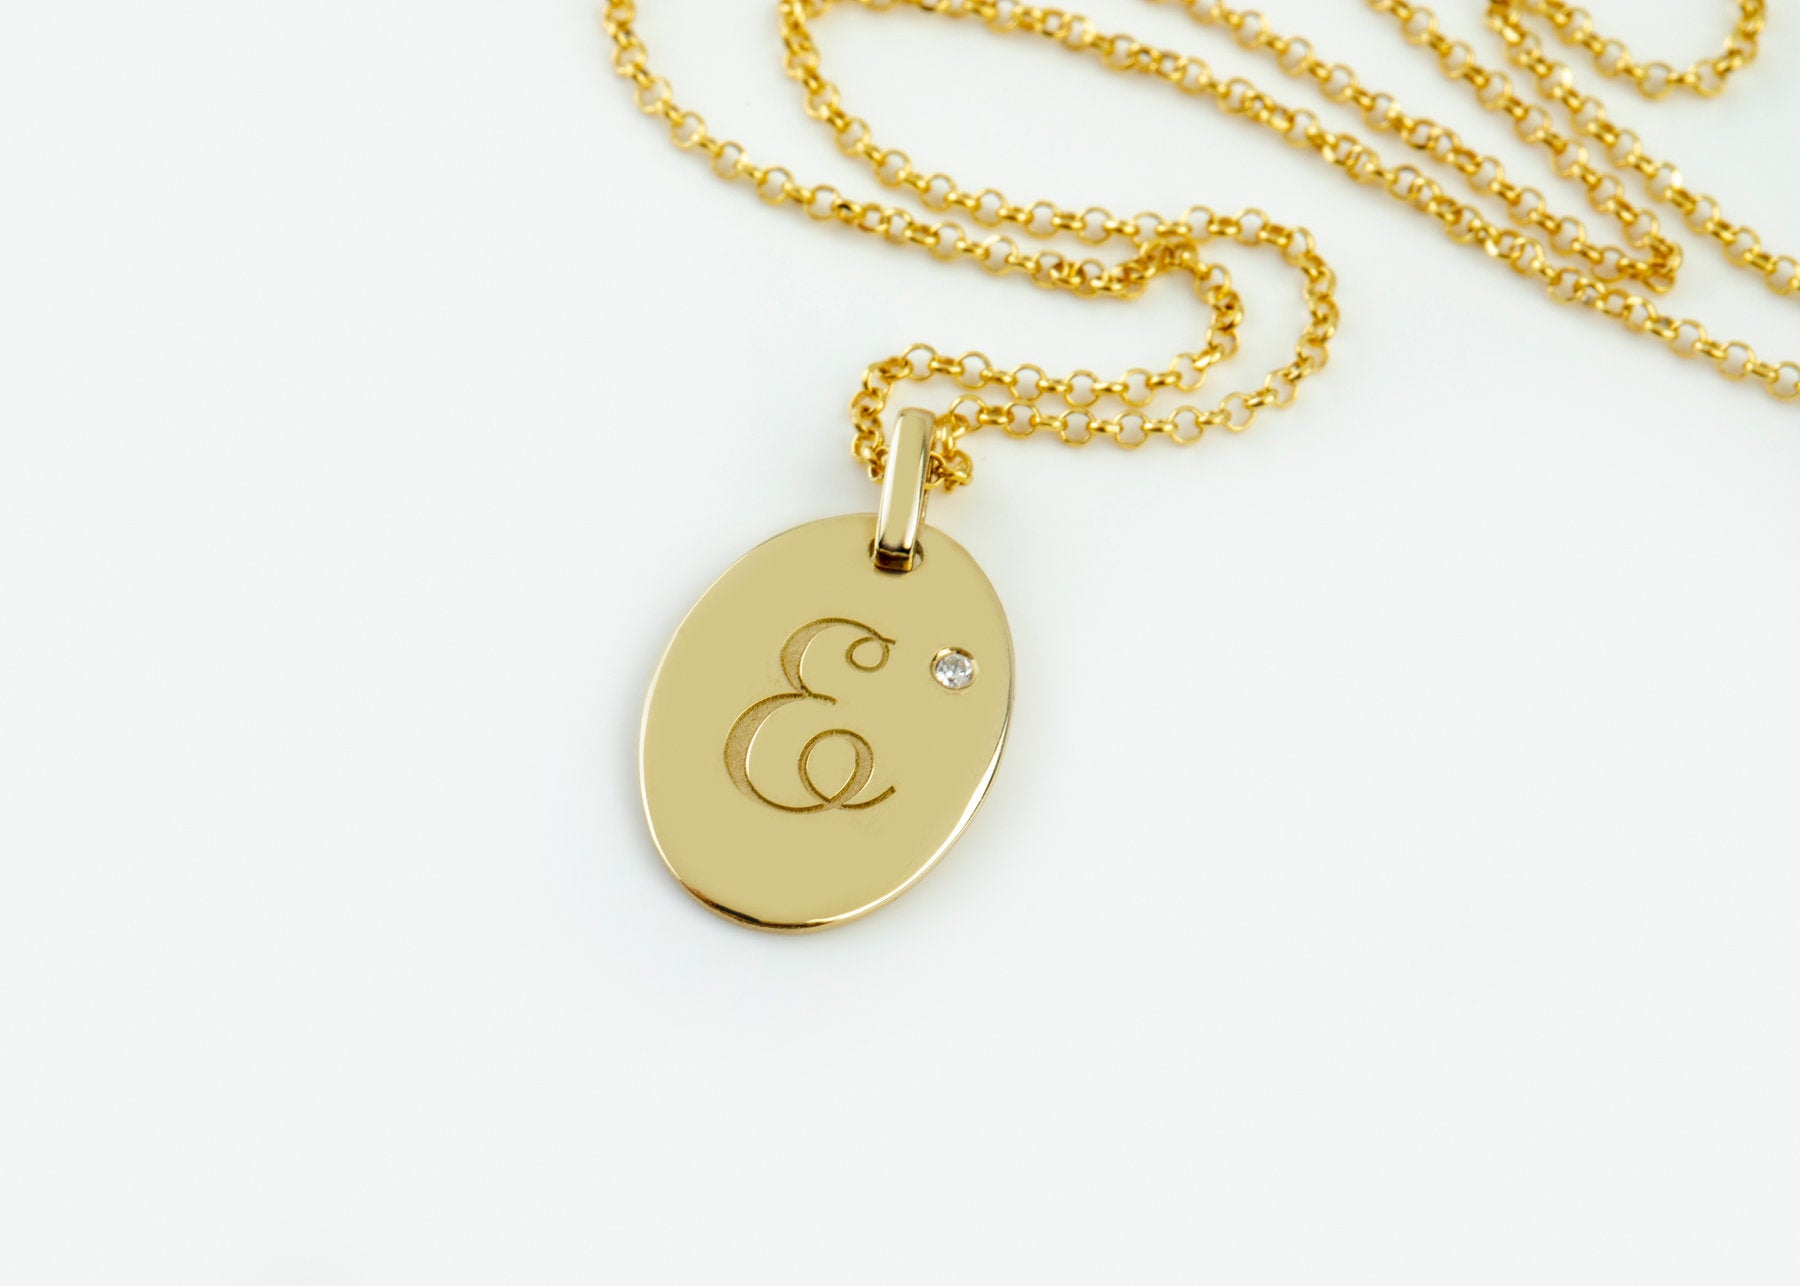 Oval shape initial charm, Letter necklace with diamond - Elegant Jewel Box